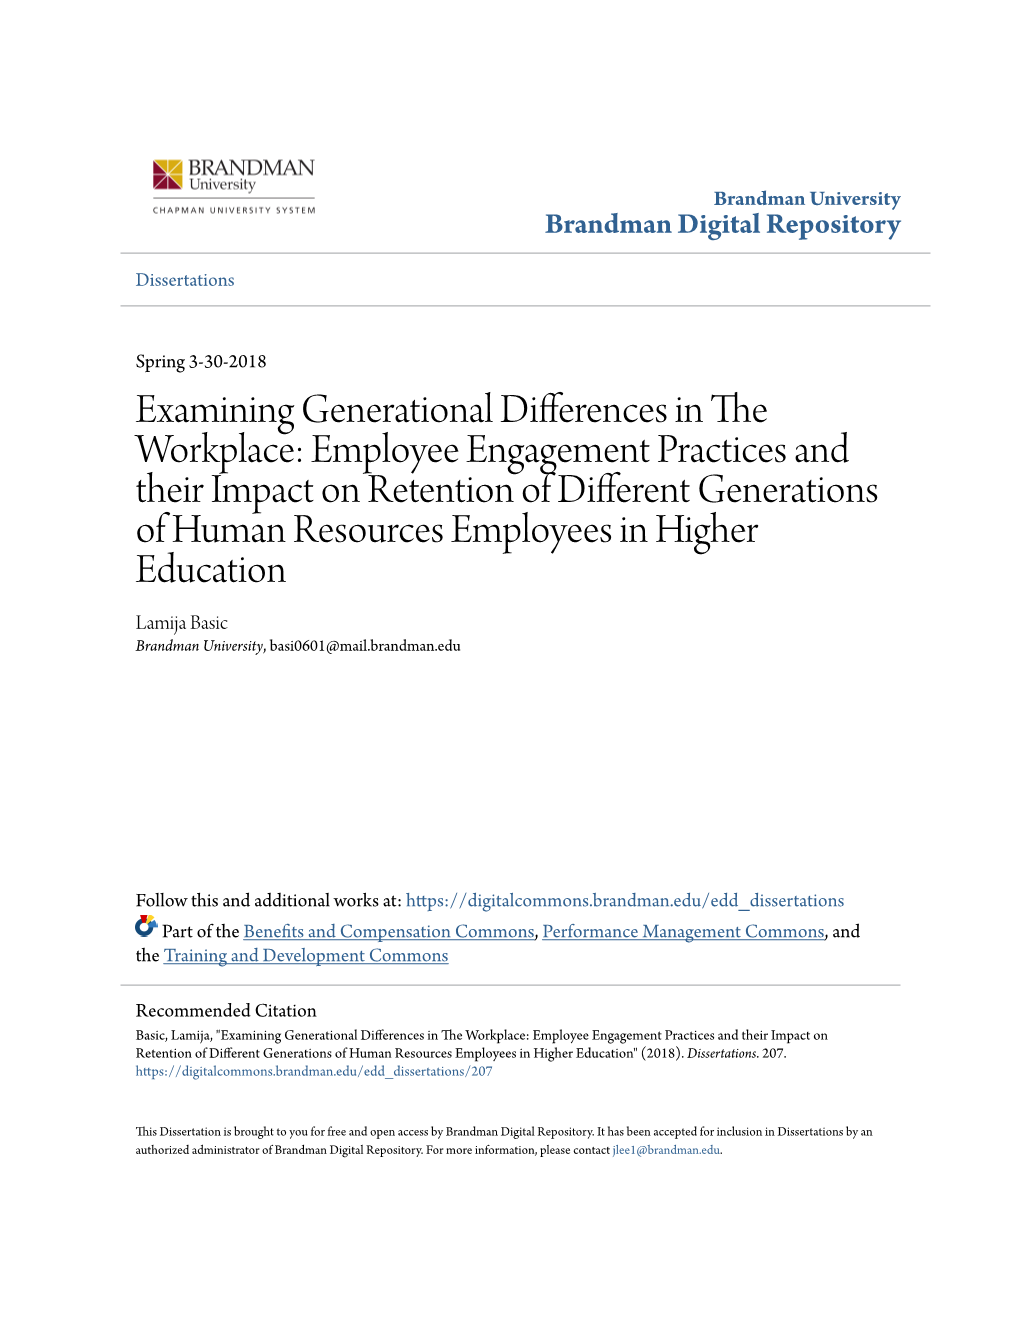 Examining Generational Differences in the Workplace